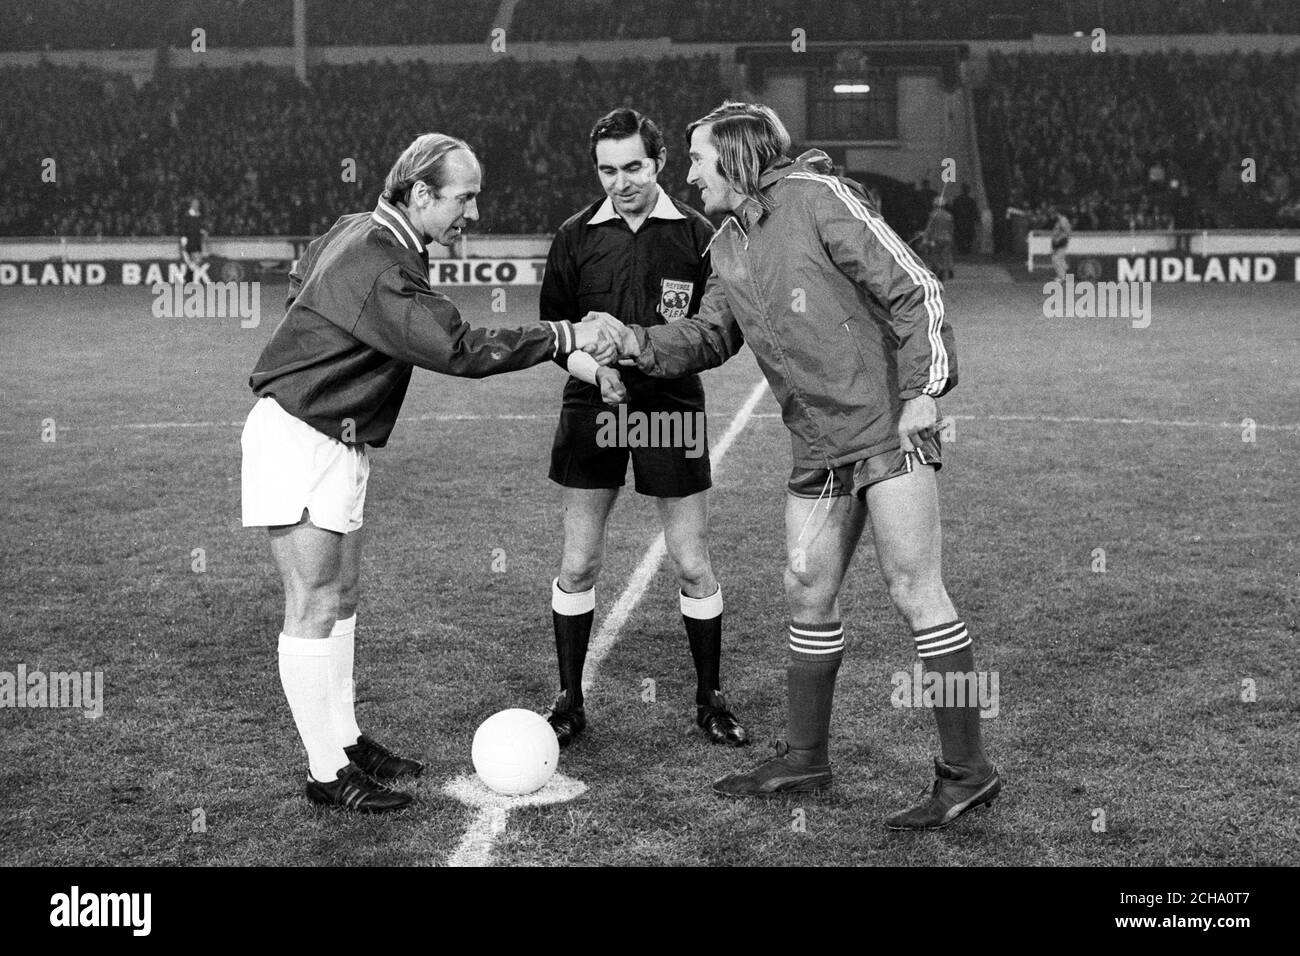 Team captains Bobby Charlton (l), Manchester United, captain of the British Three, and Gunter Netzer, of Borussia Moenchengladbach and West Germany, shake hands before the match. Referee is Norman Burtenshaw. Stock Photo